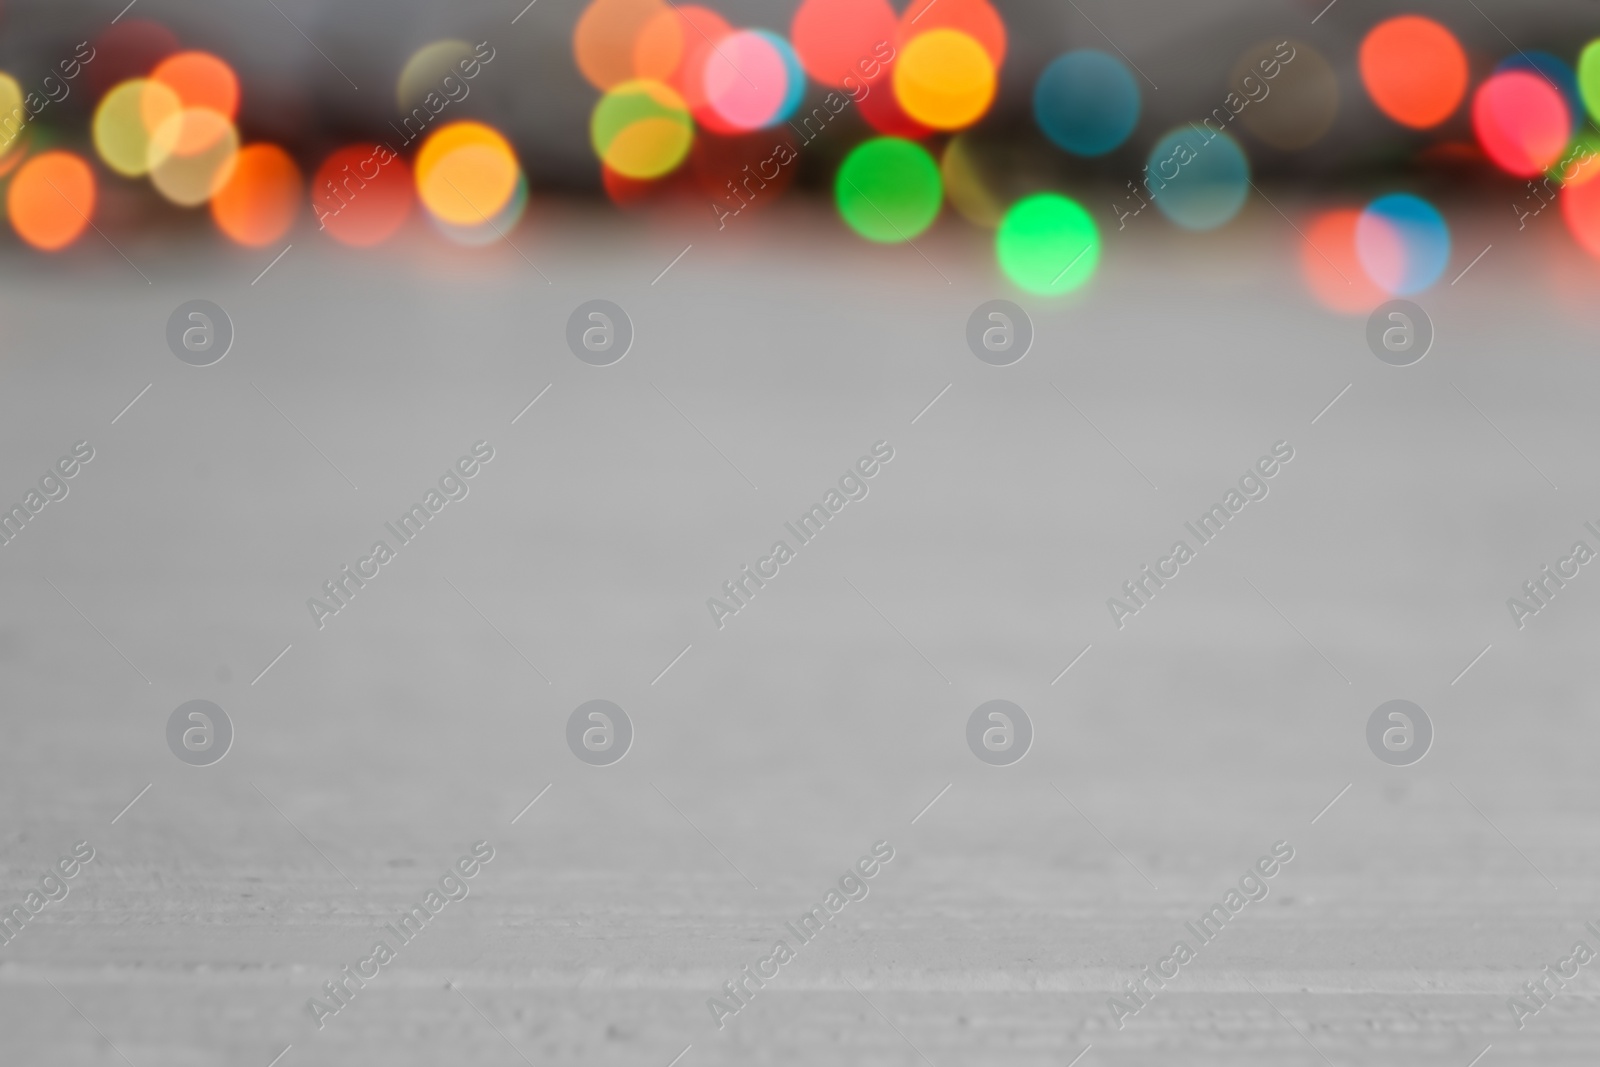 Photo of Colorful lights on light table, blurred view. Space for text